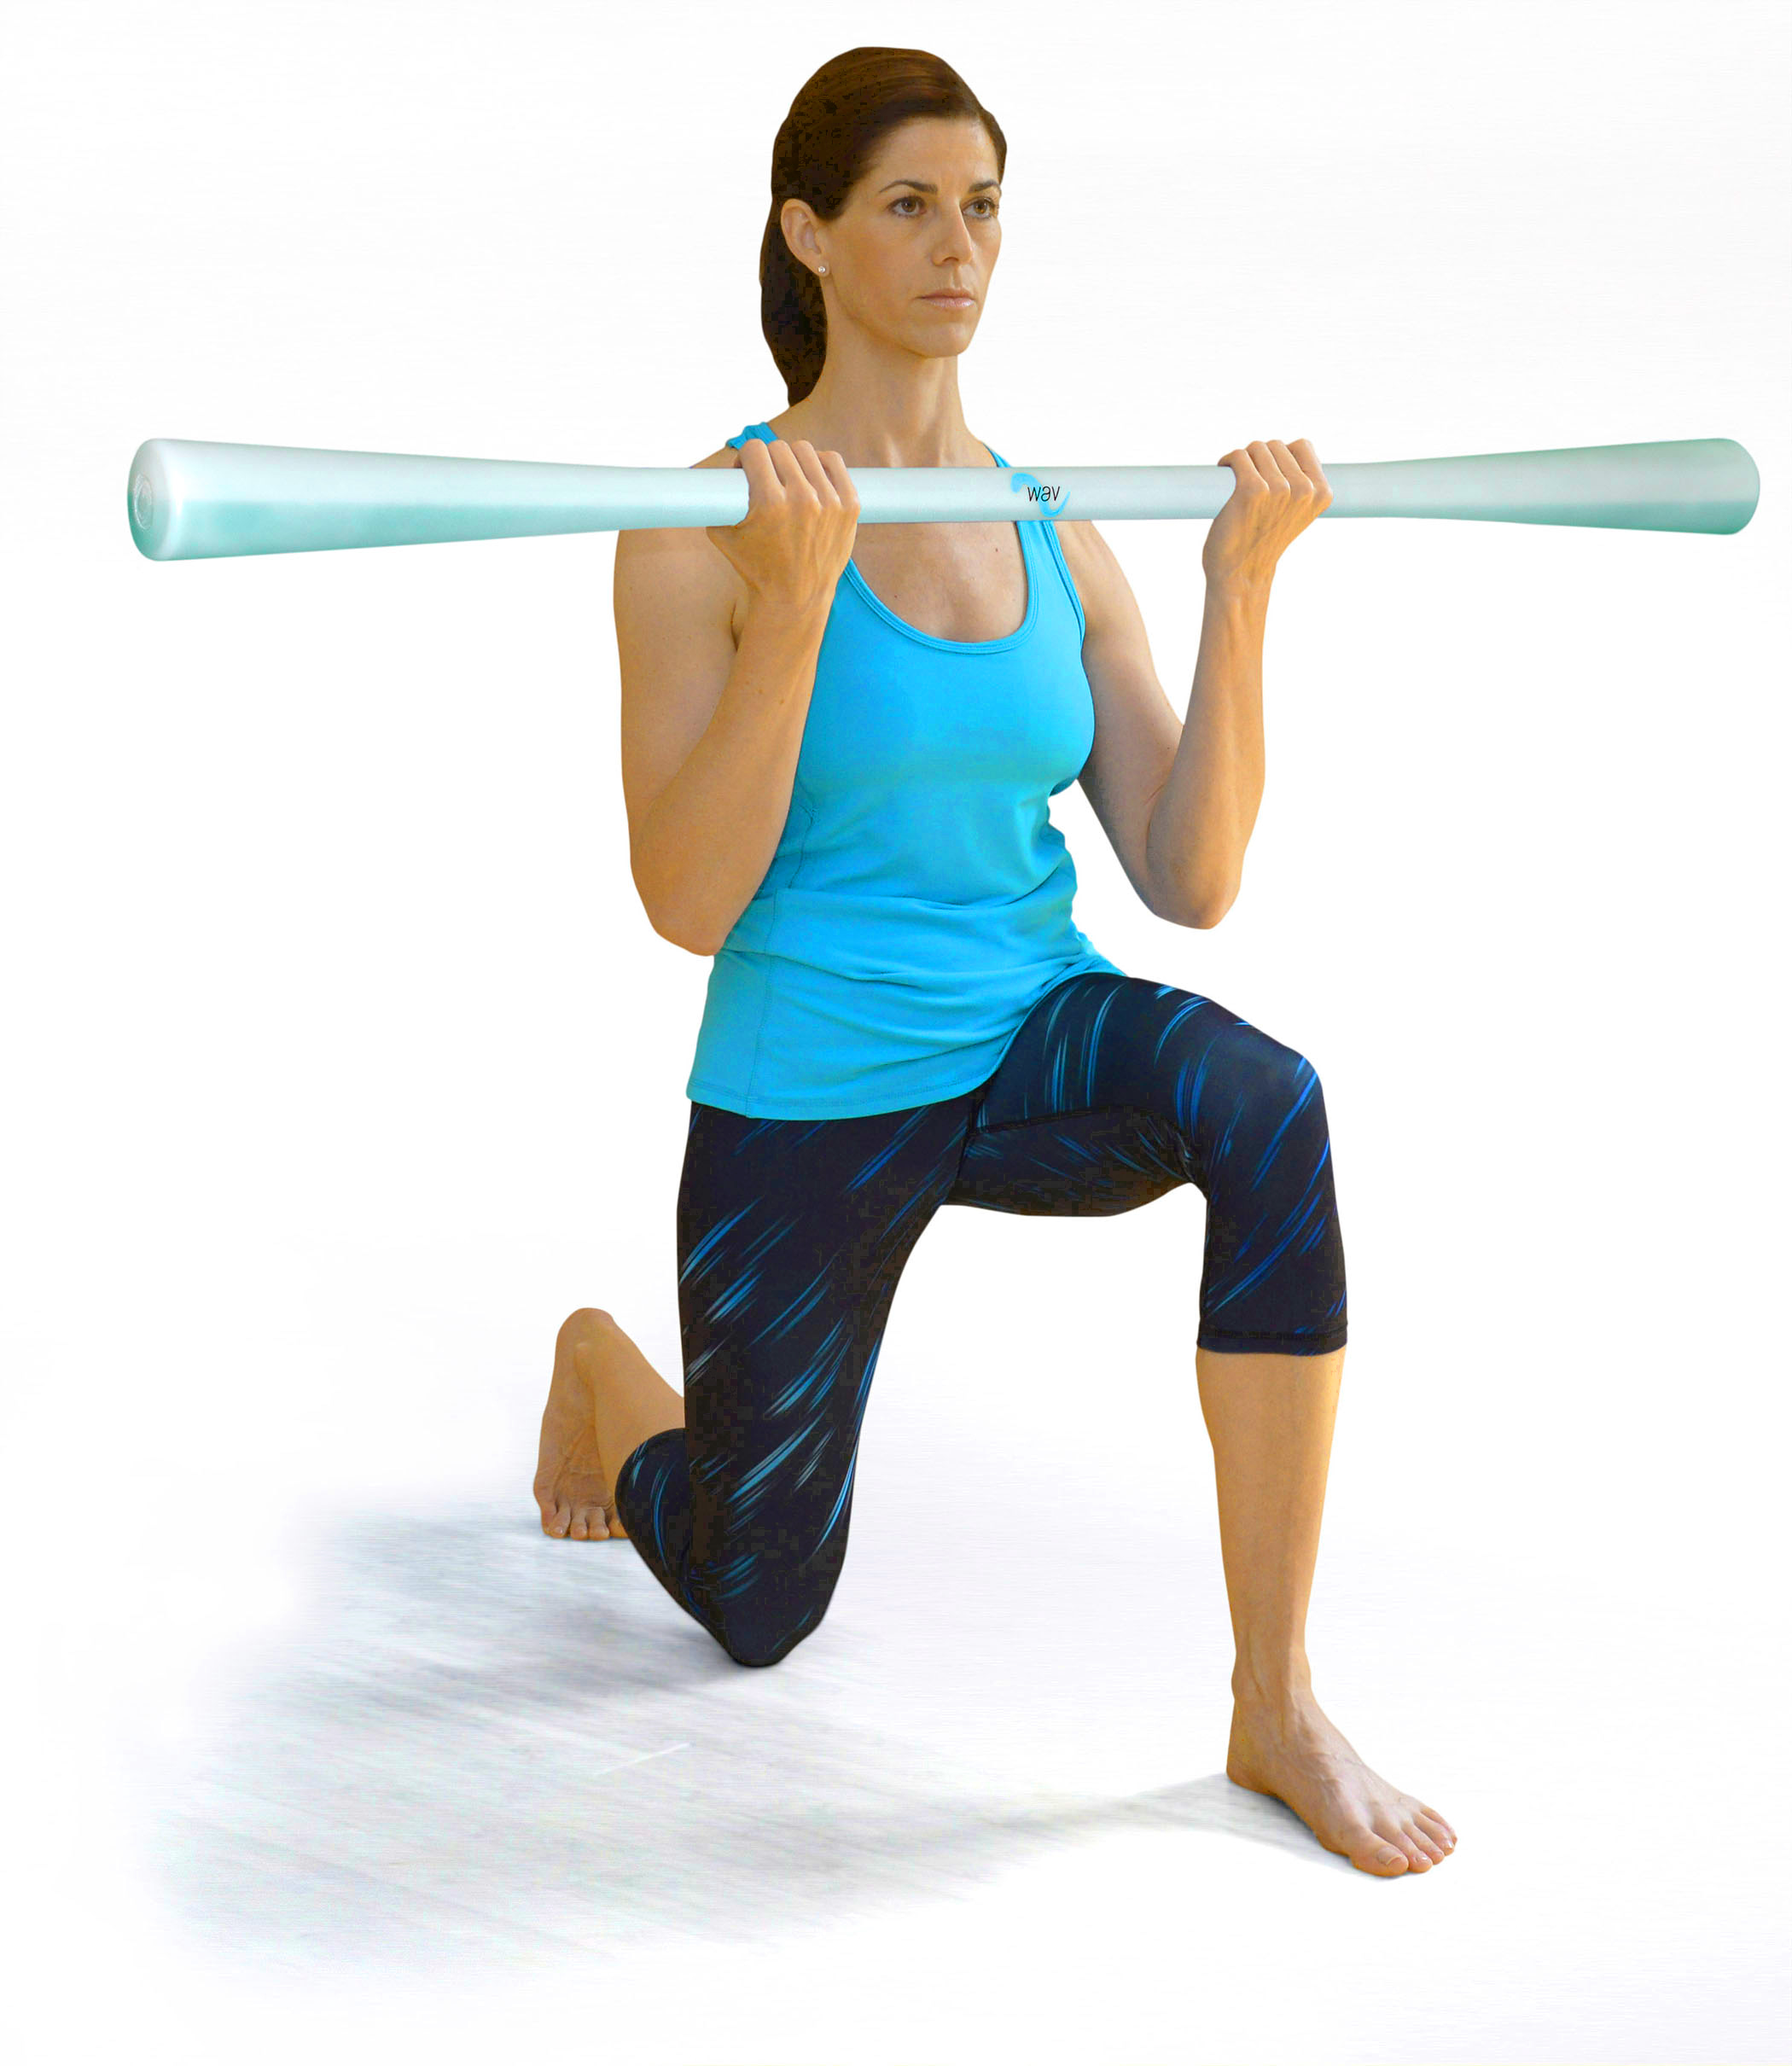 How to improve balance with WAV holistic exercise bar